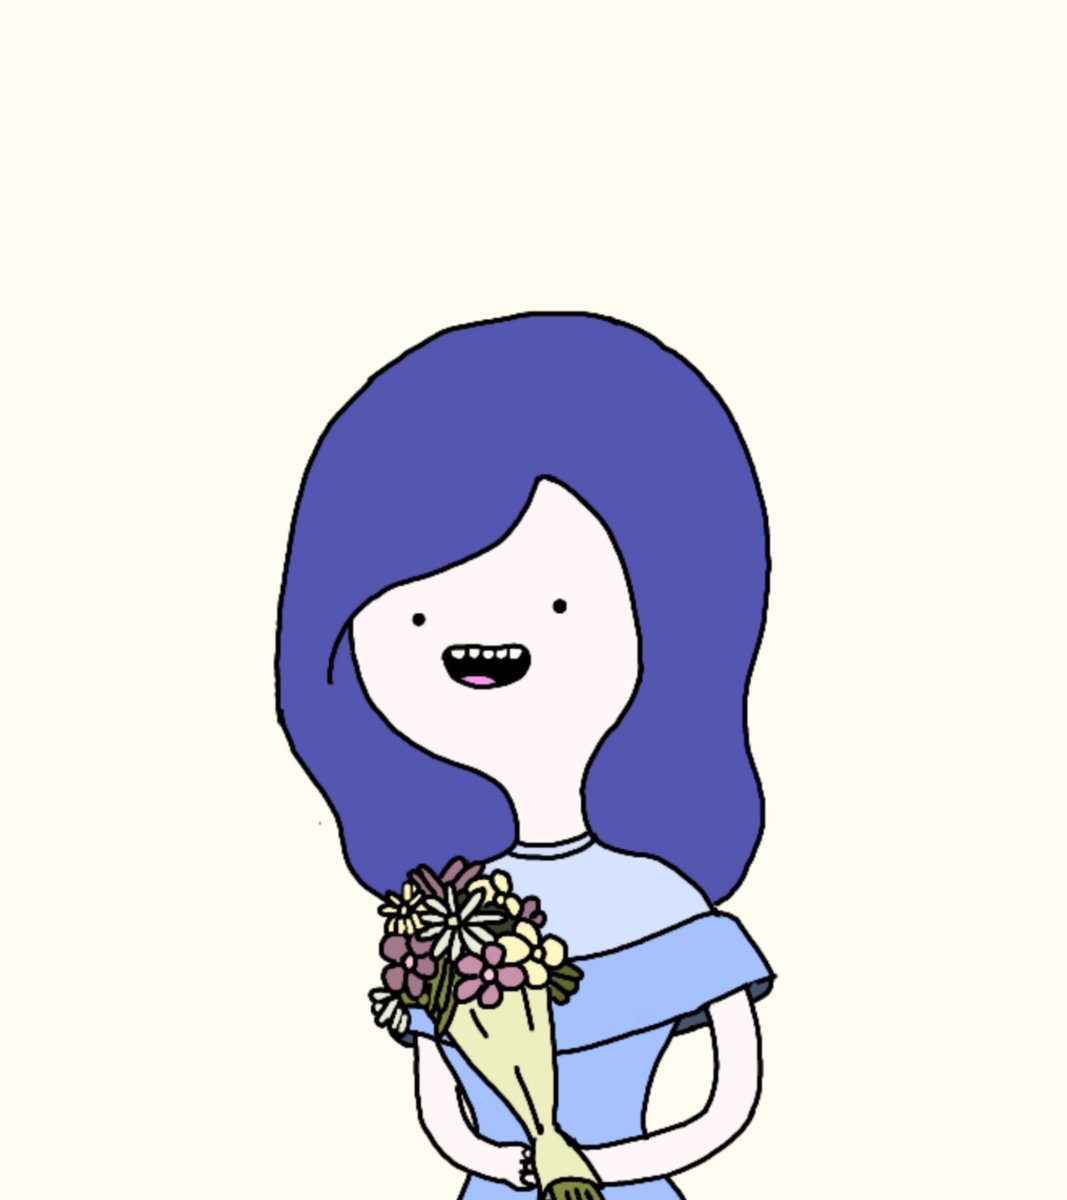 Twice as adventure time characters:a cute fanart thread 